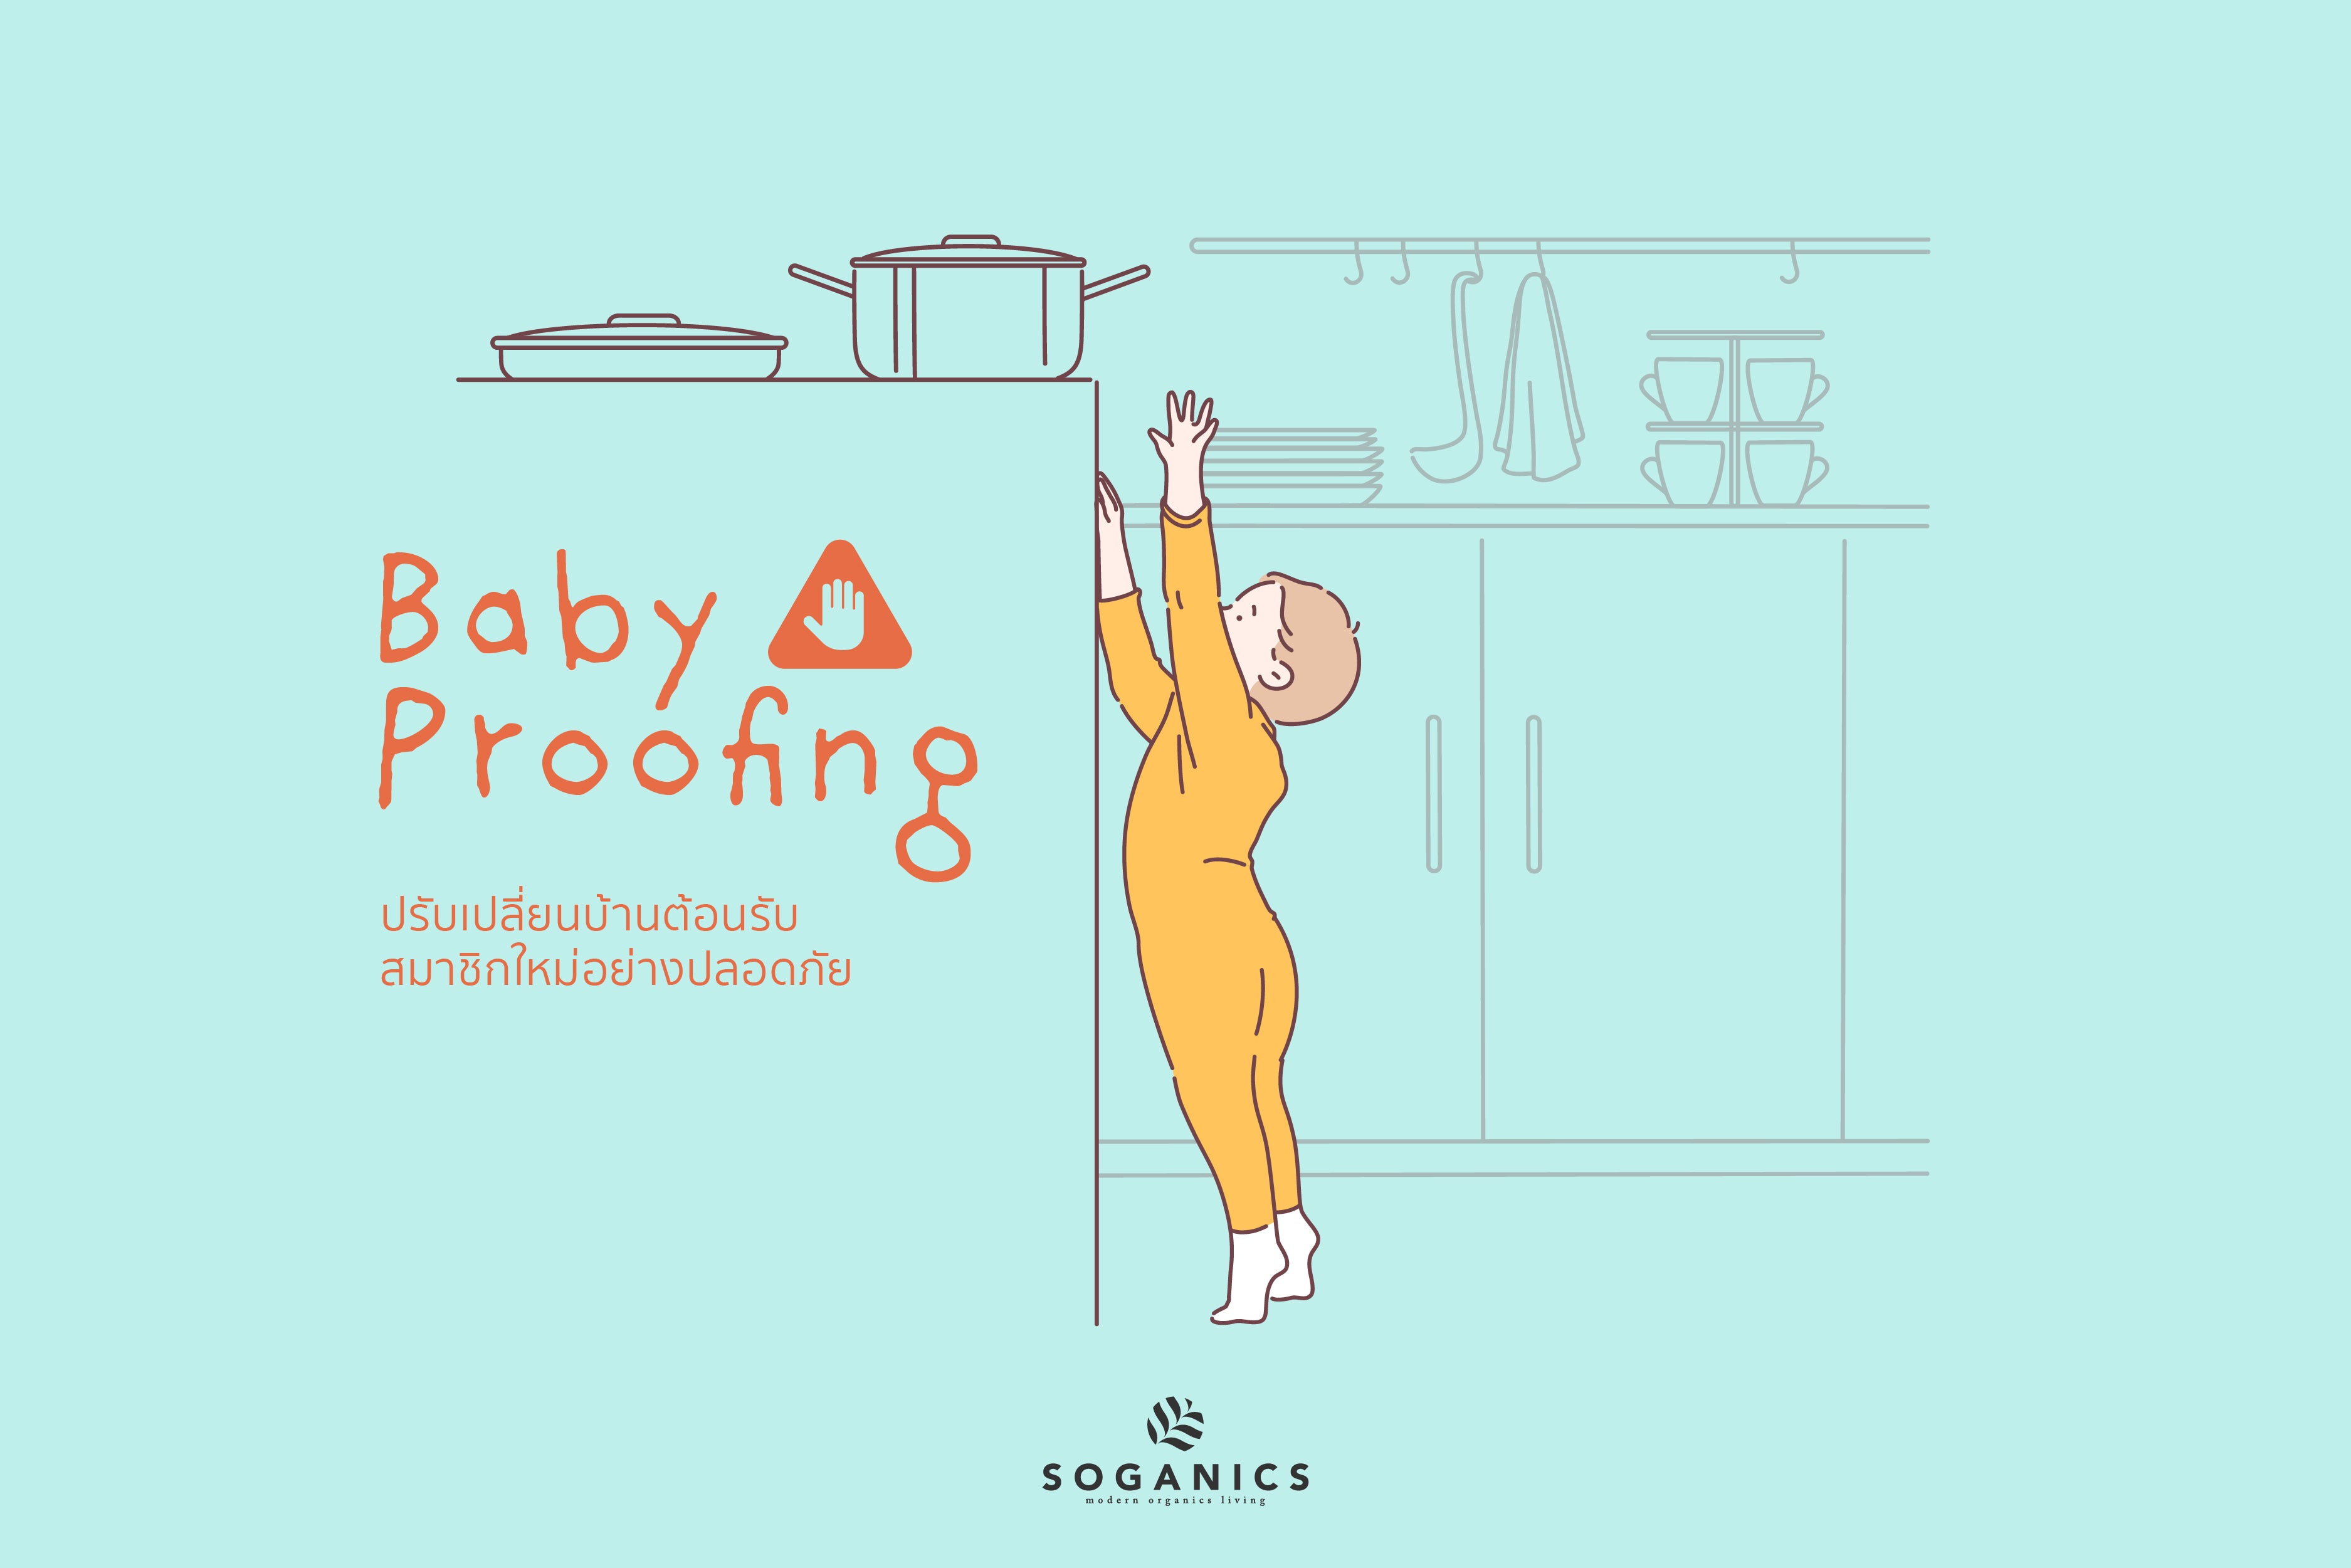 Baby Proofing